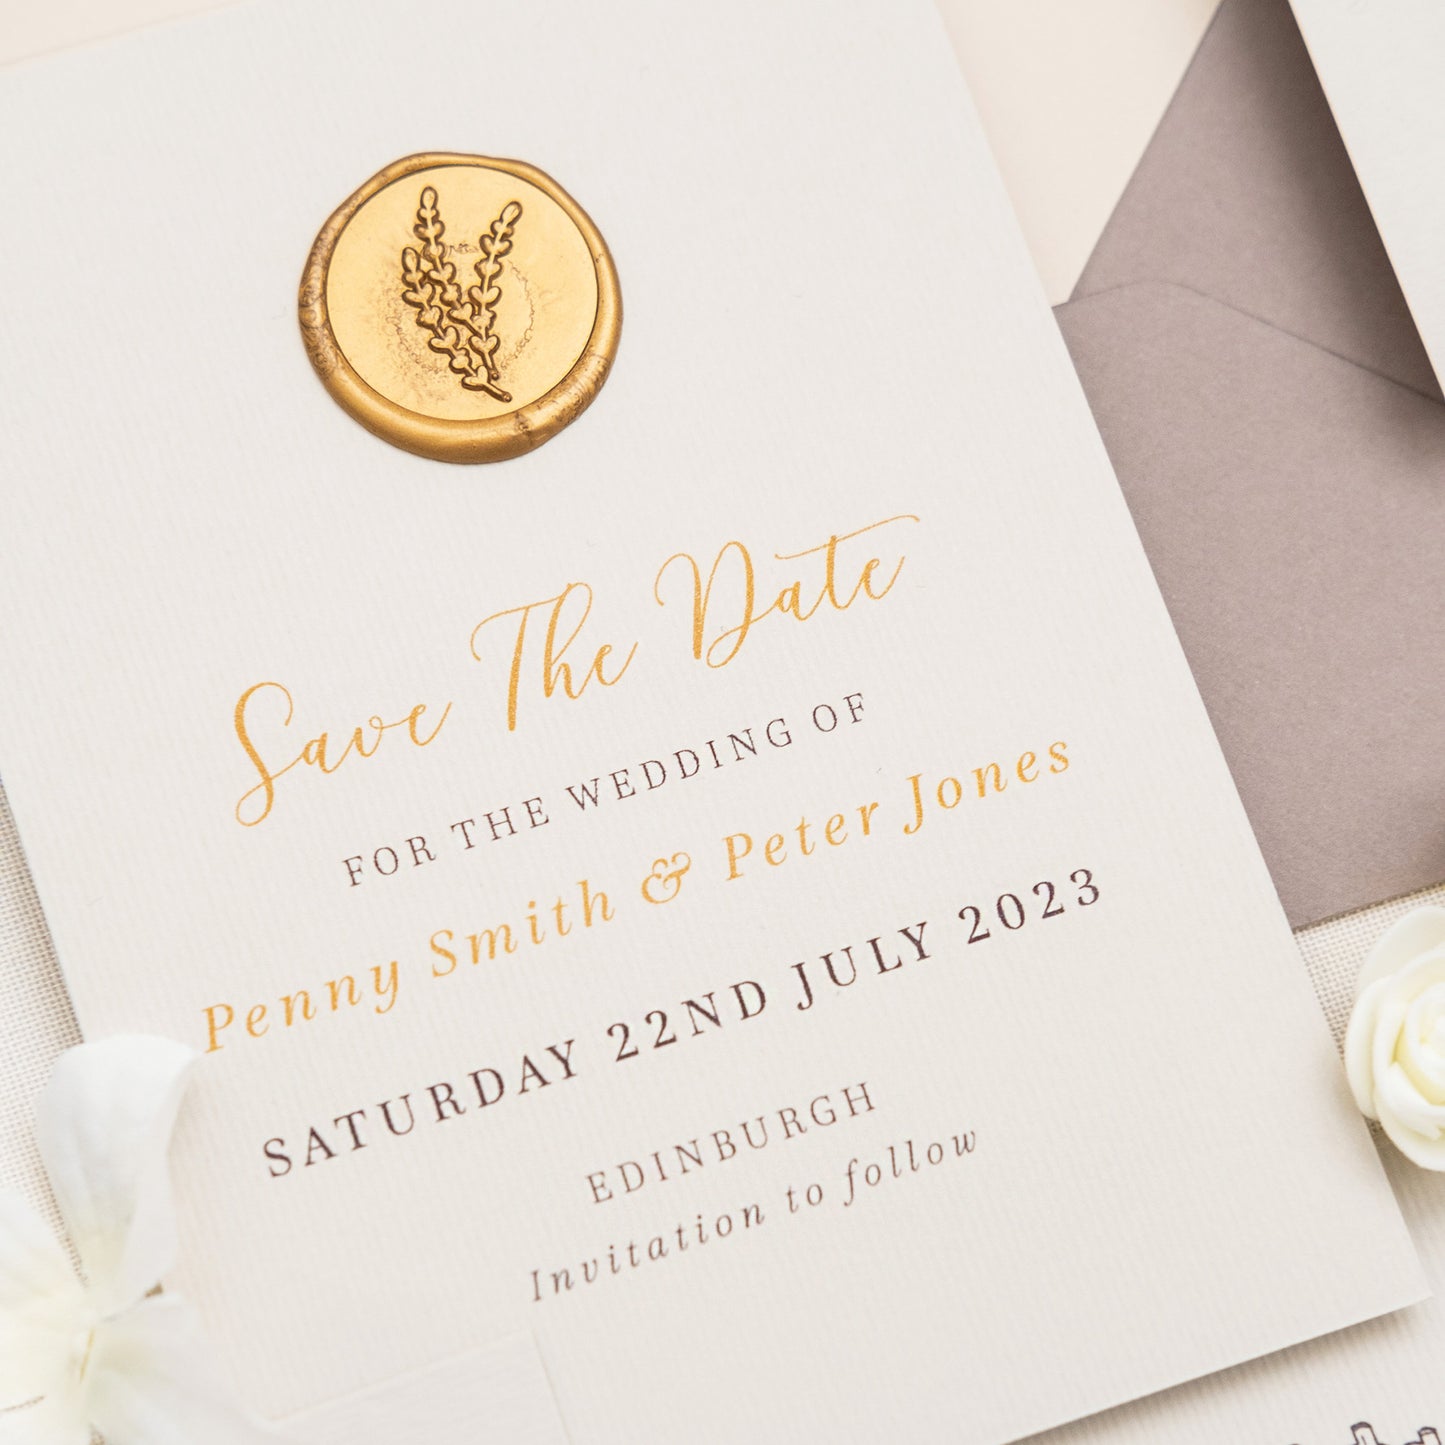 Save The Date With Gold Wax Seal